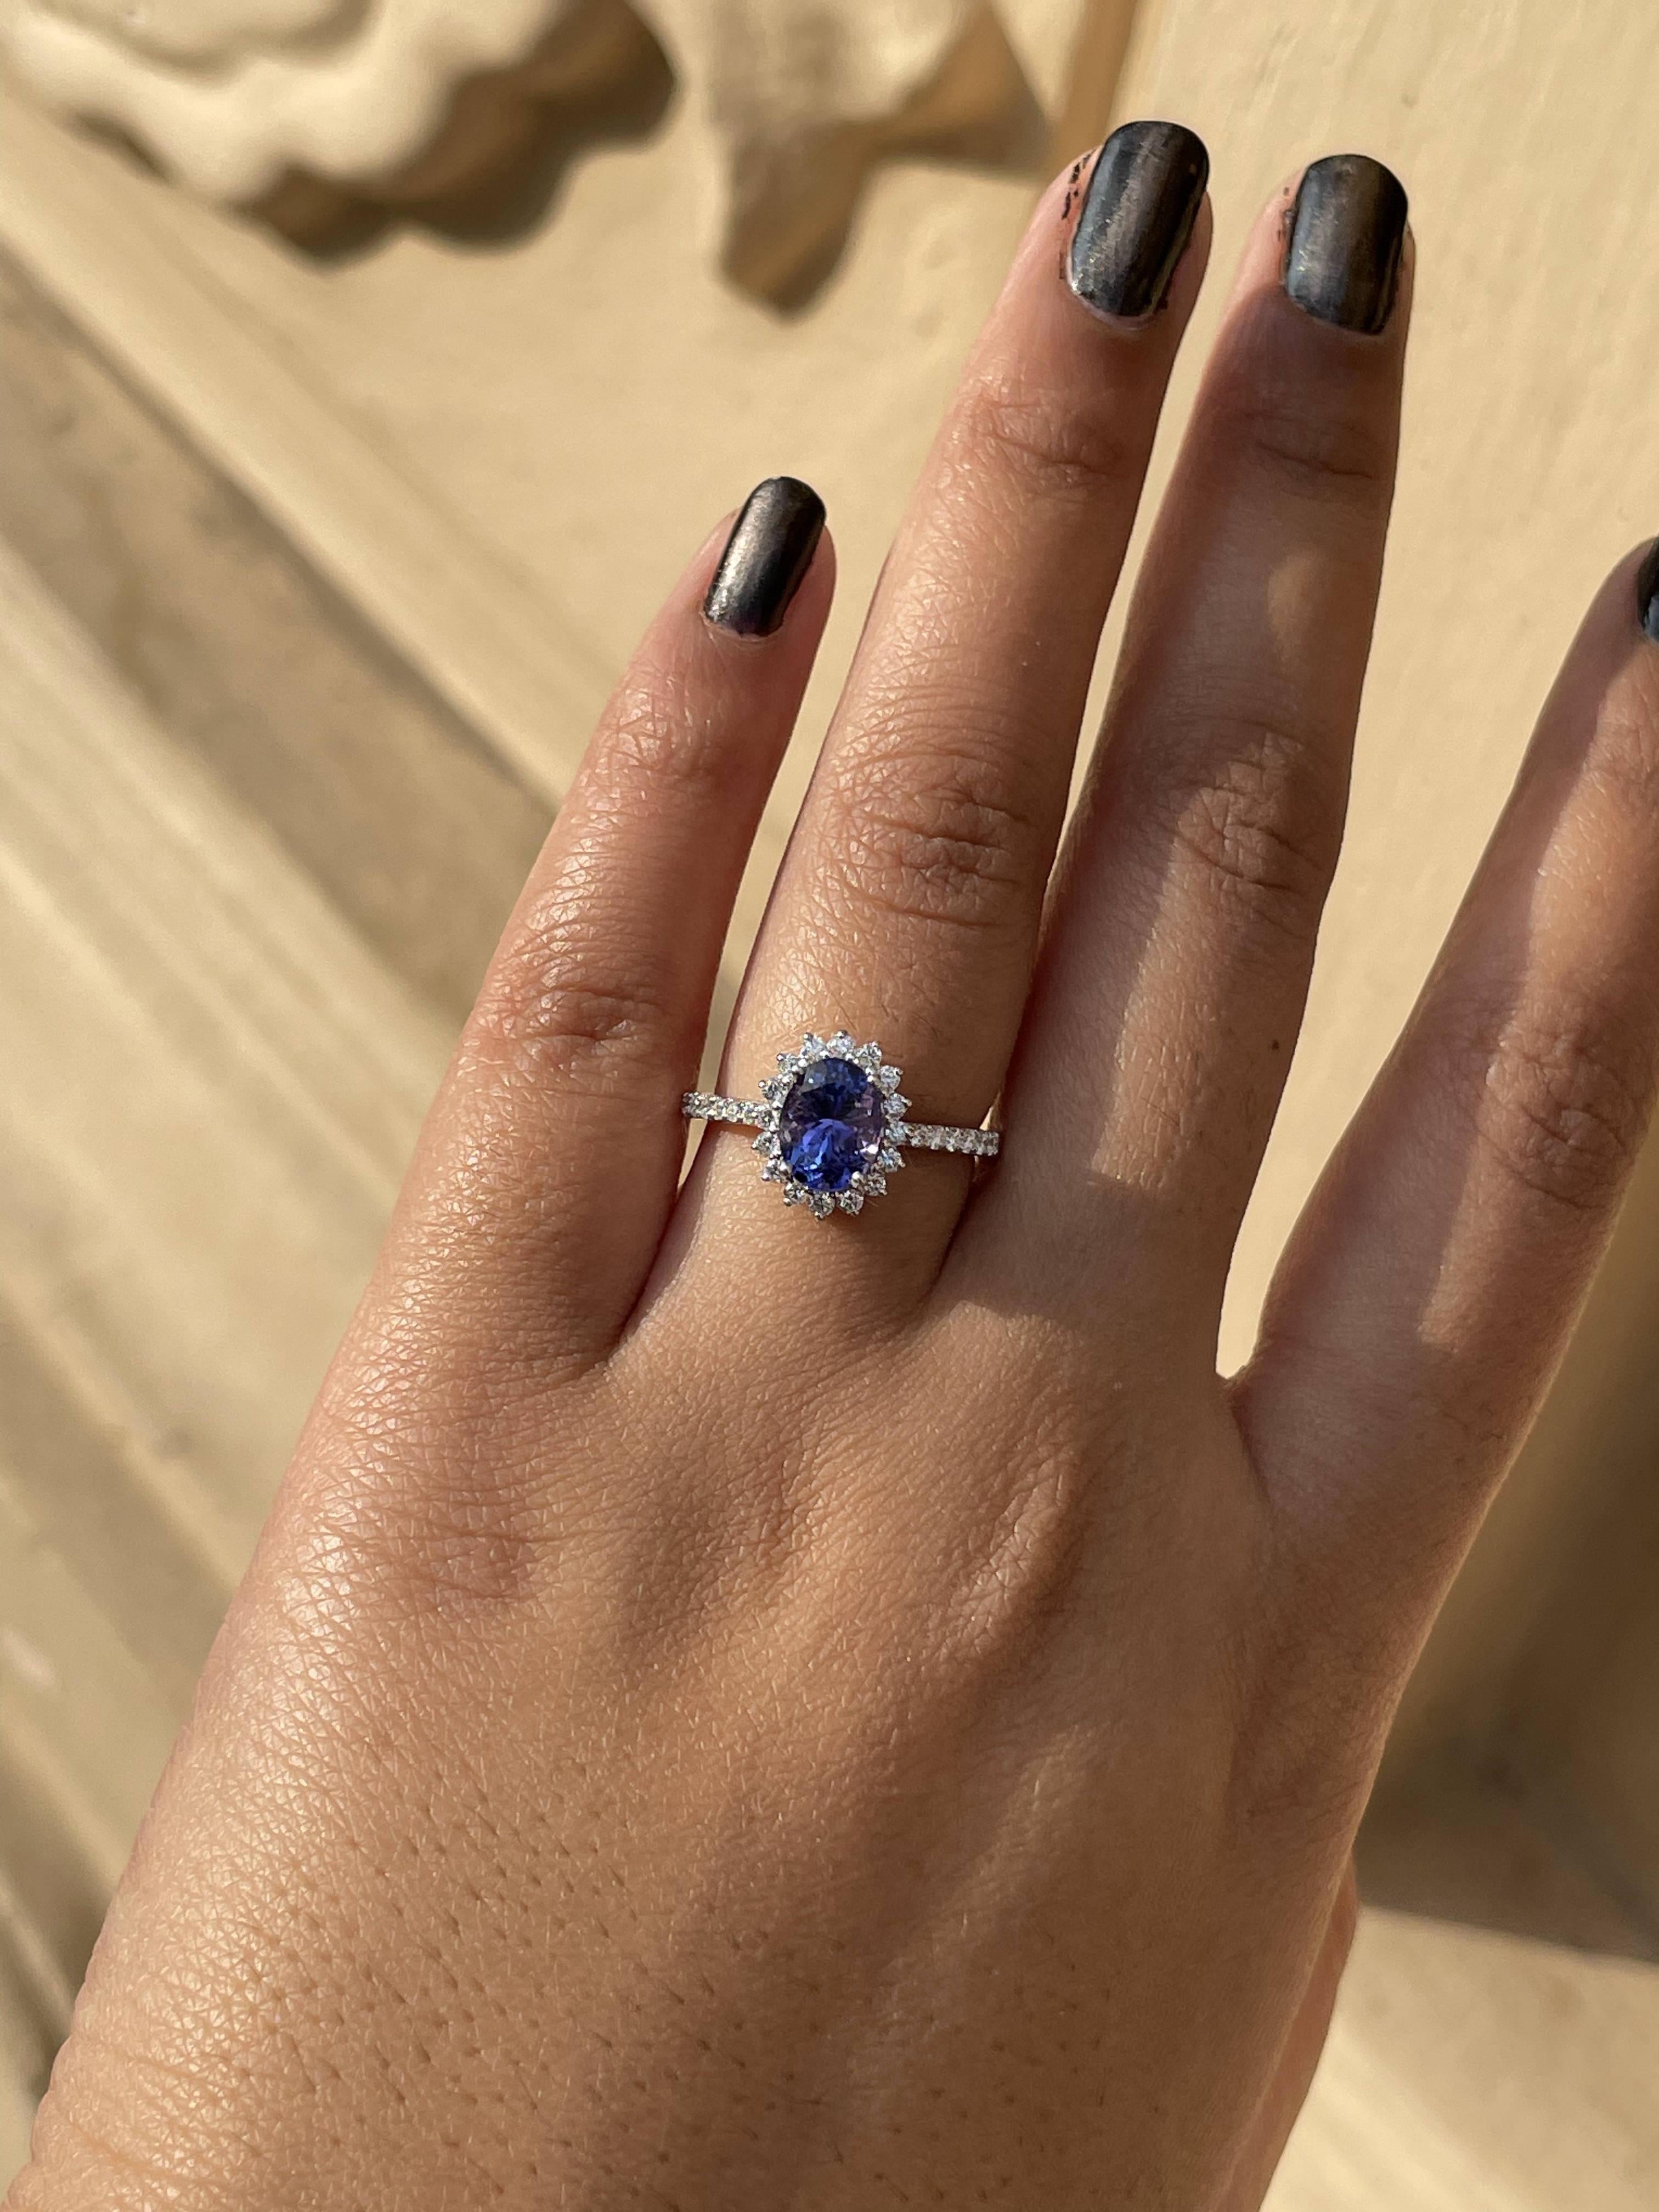 For Sale:  1.59 Carat Natural Tanzanite and Diamond Ring in 18k Solid White Gold 5